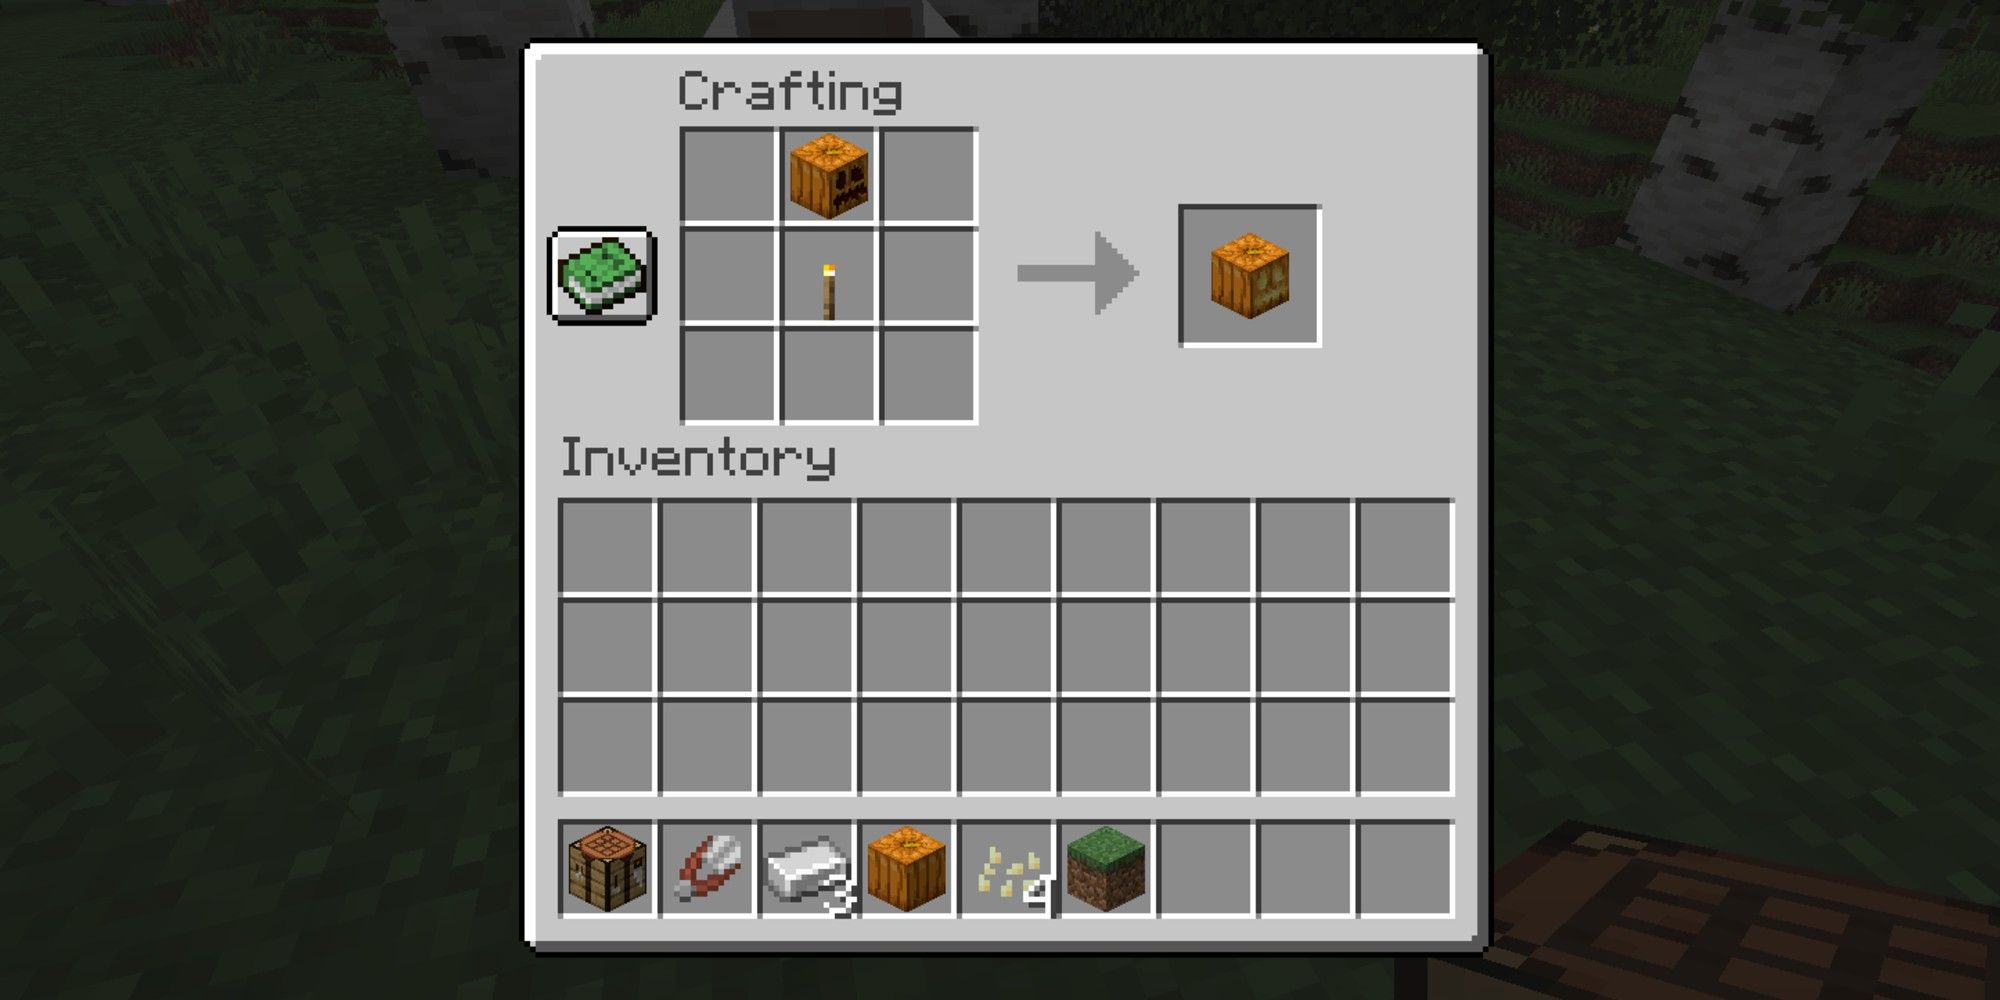 player crafting a jack o lantern from crafting table with a torch and a carved pumpkin